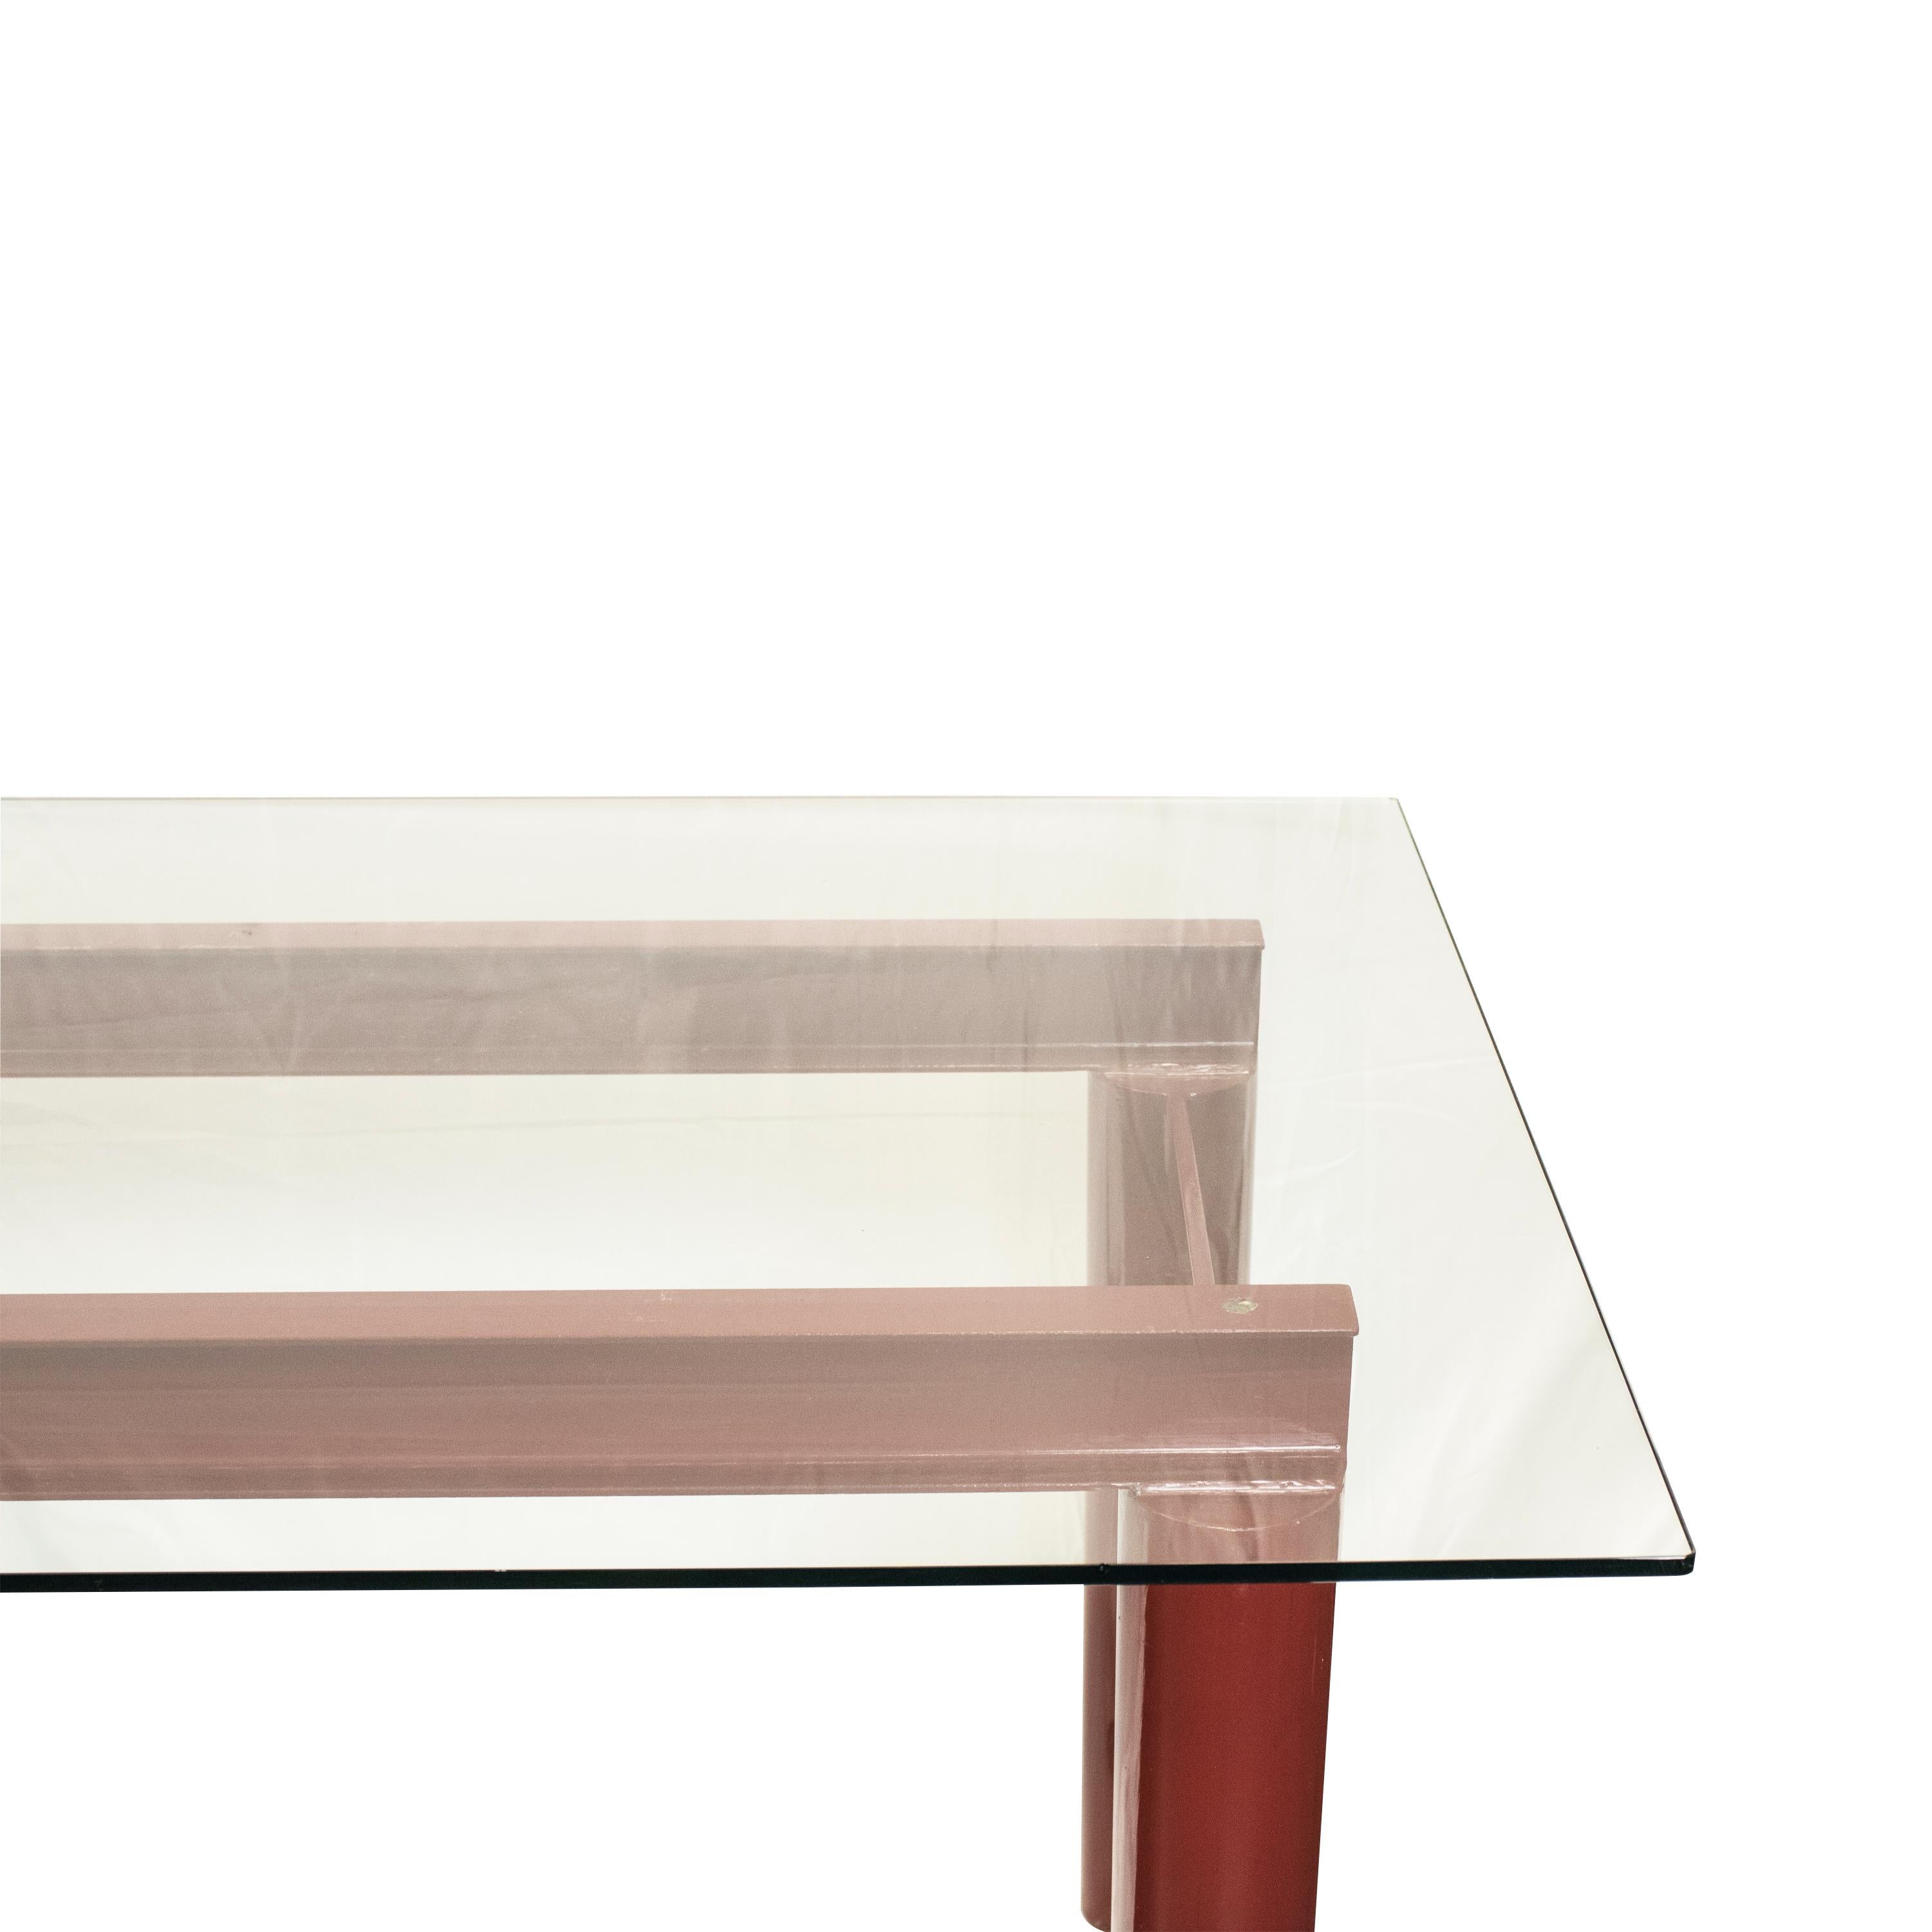 Modern Bourdeaux Steel Dining Table with Glass Top 187 x 89 cm, Italia, 1970 In Good Condition For Sale In Madrid, ES